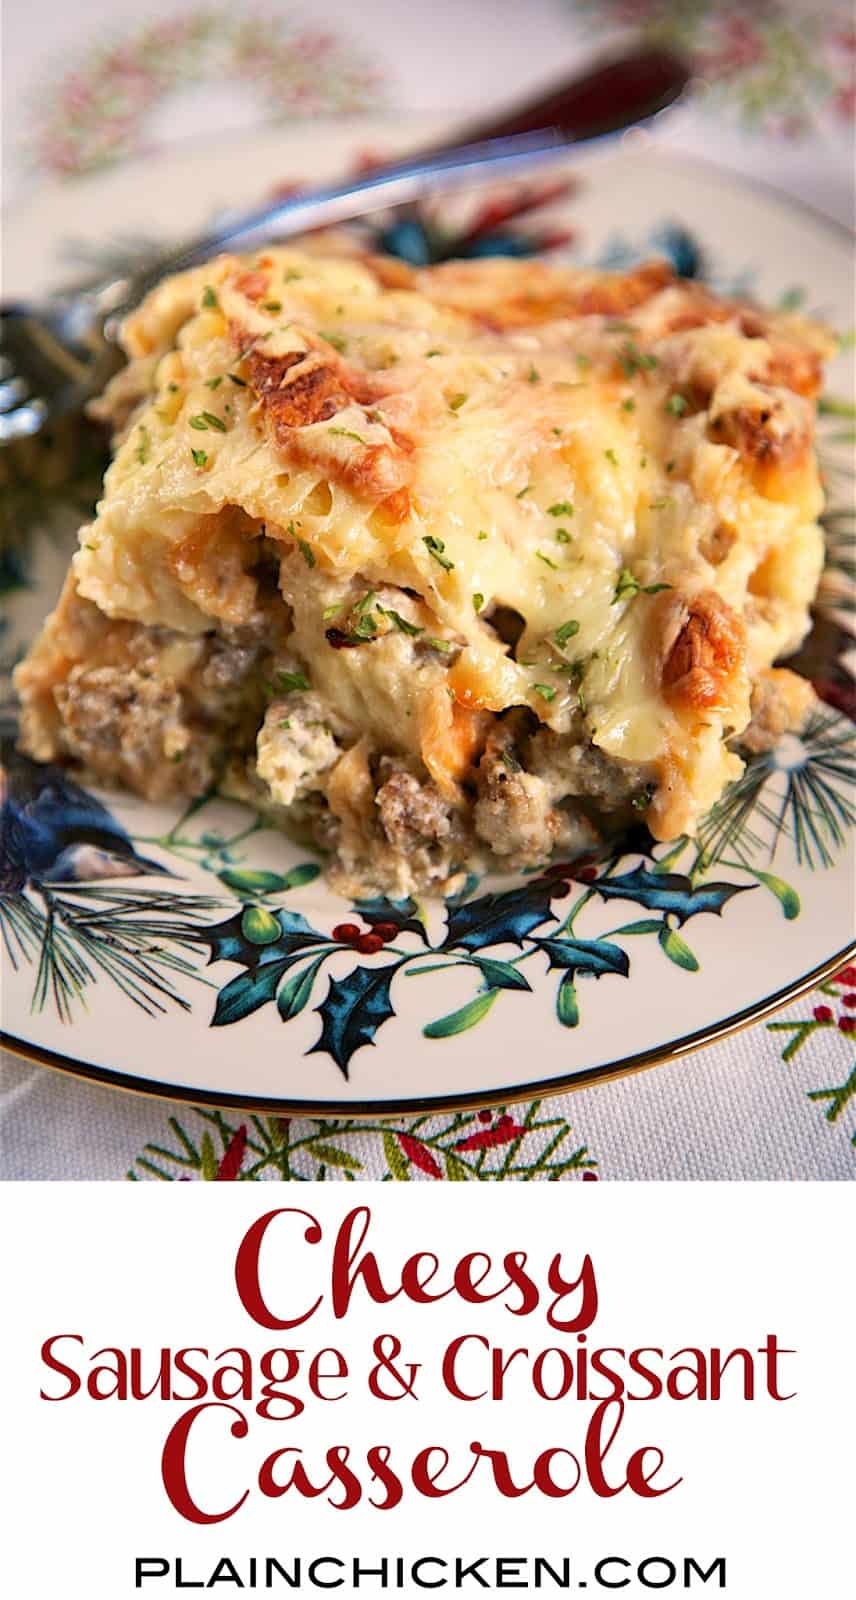 Overnight Cheesy Sausage and Croissant Casserole - buttery croissants, sausage, eggs, heavy cream and gruyere cheese - make and refrigerate overnight. SO delicious!! Great casserole recipe for Christmas morning!